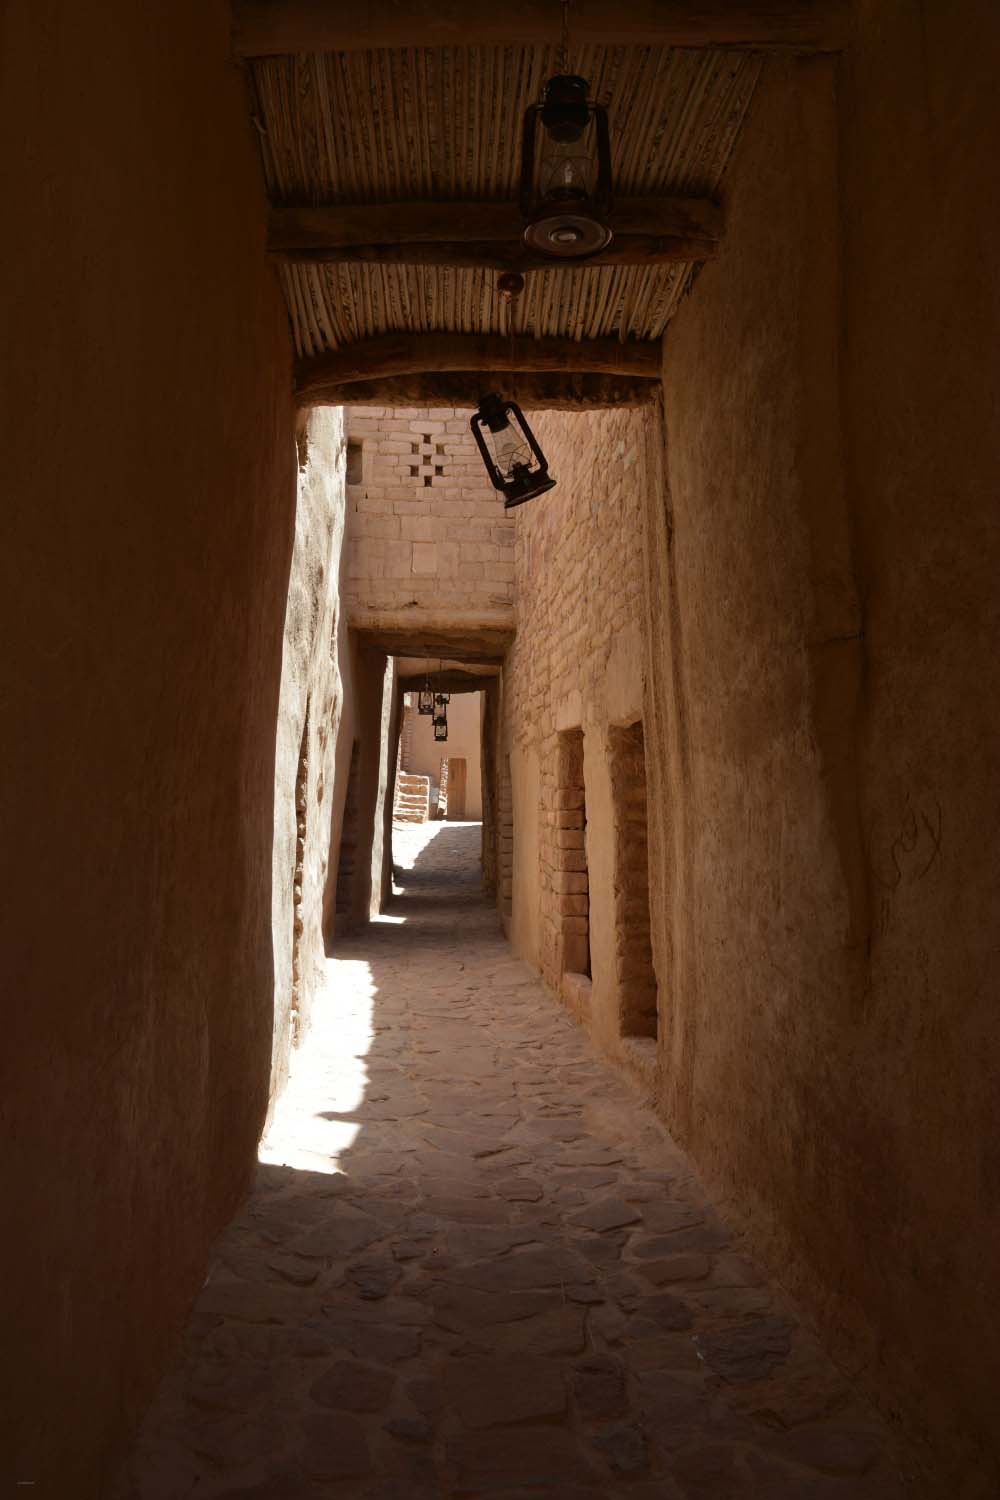 al-Ula - View of a partially covered street in old town. Lanterns hanging from the ceiling.